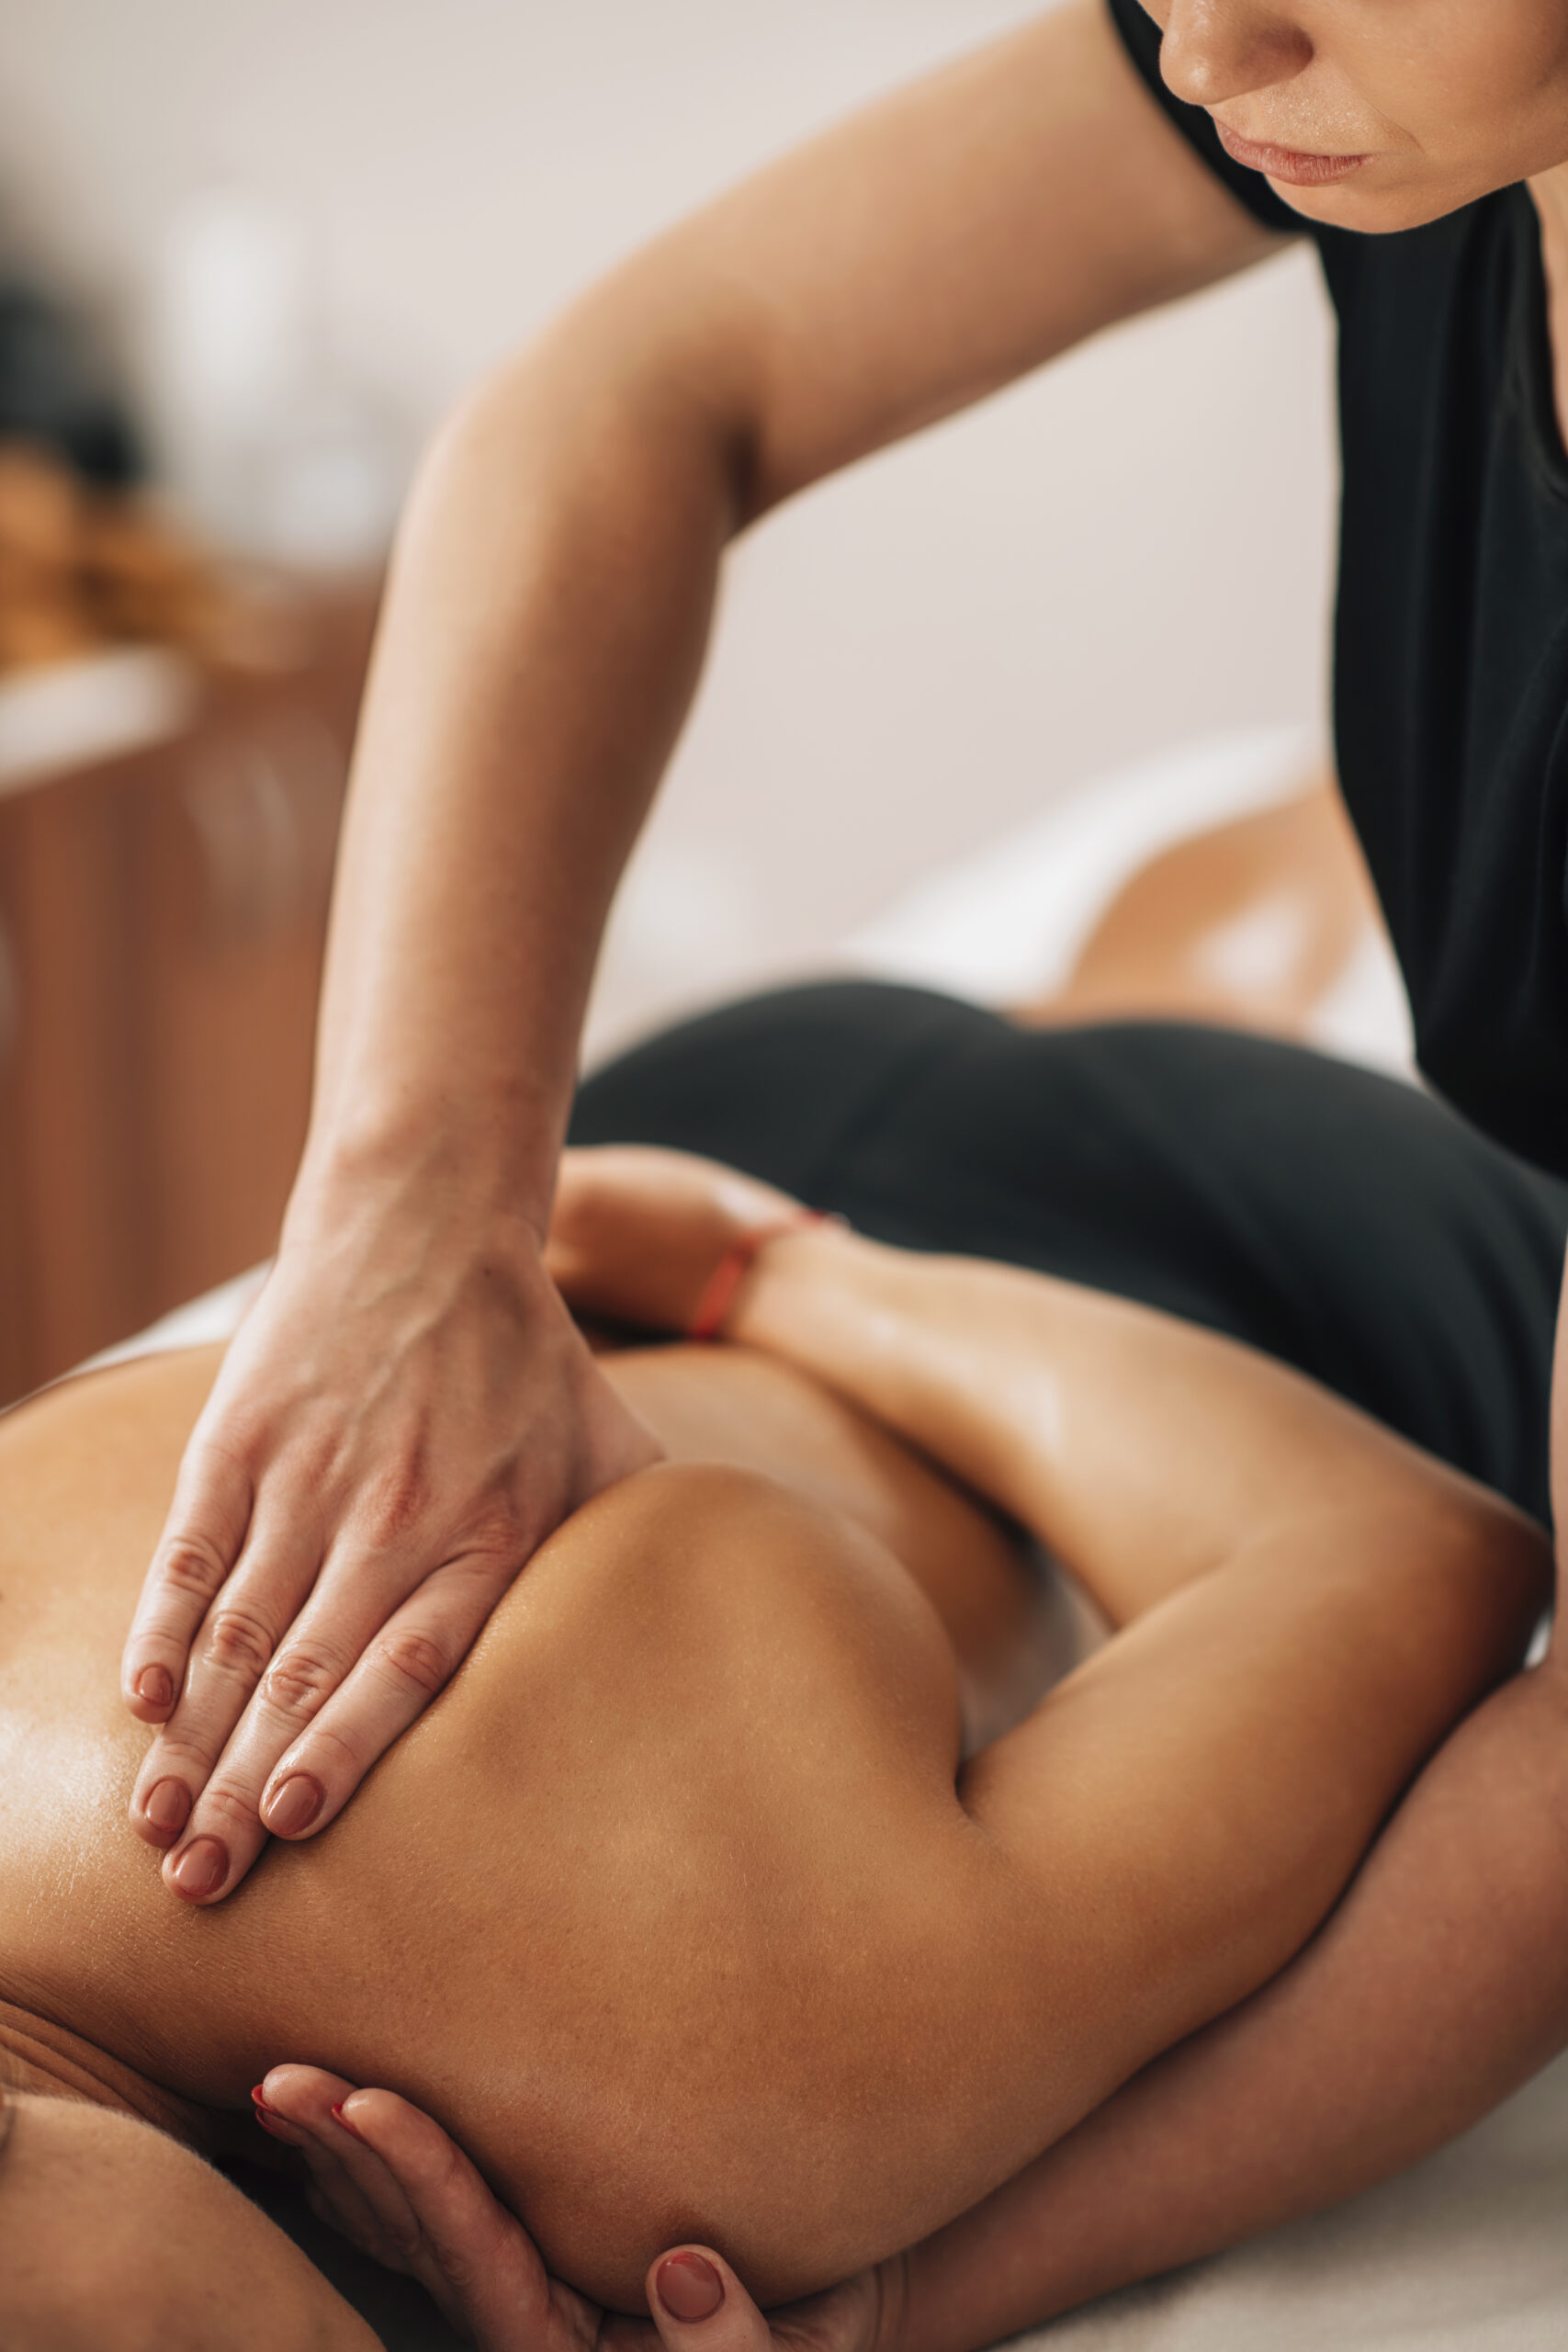 Relaxing neck and shoulder massage. Tanned woman enjoying neck and shoulder massage in a wellness center